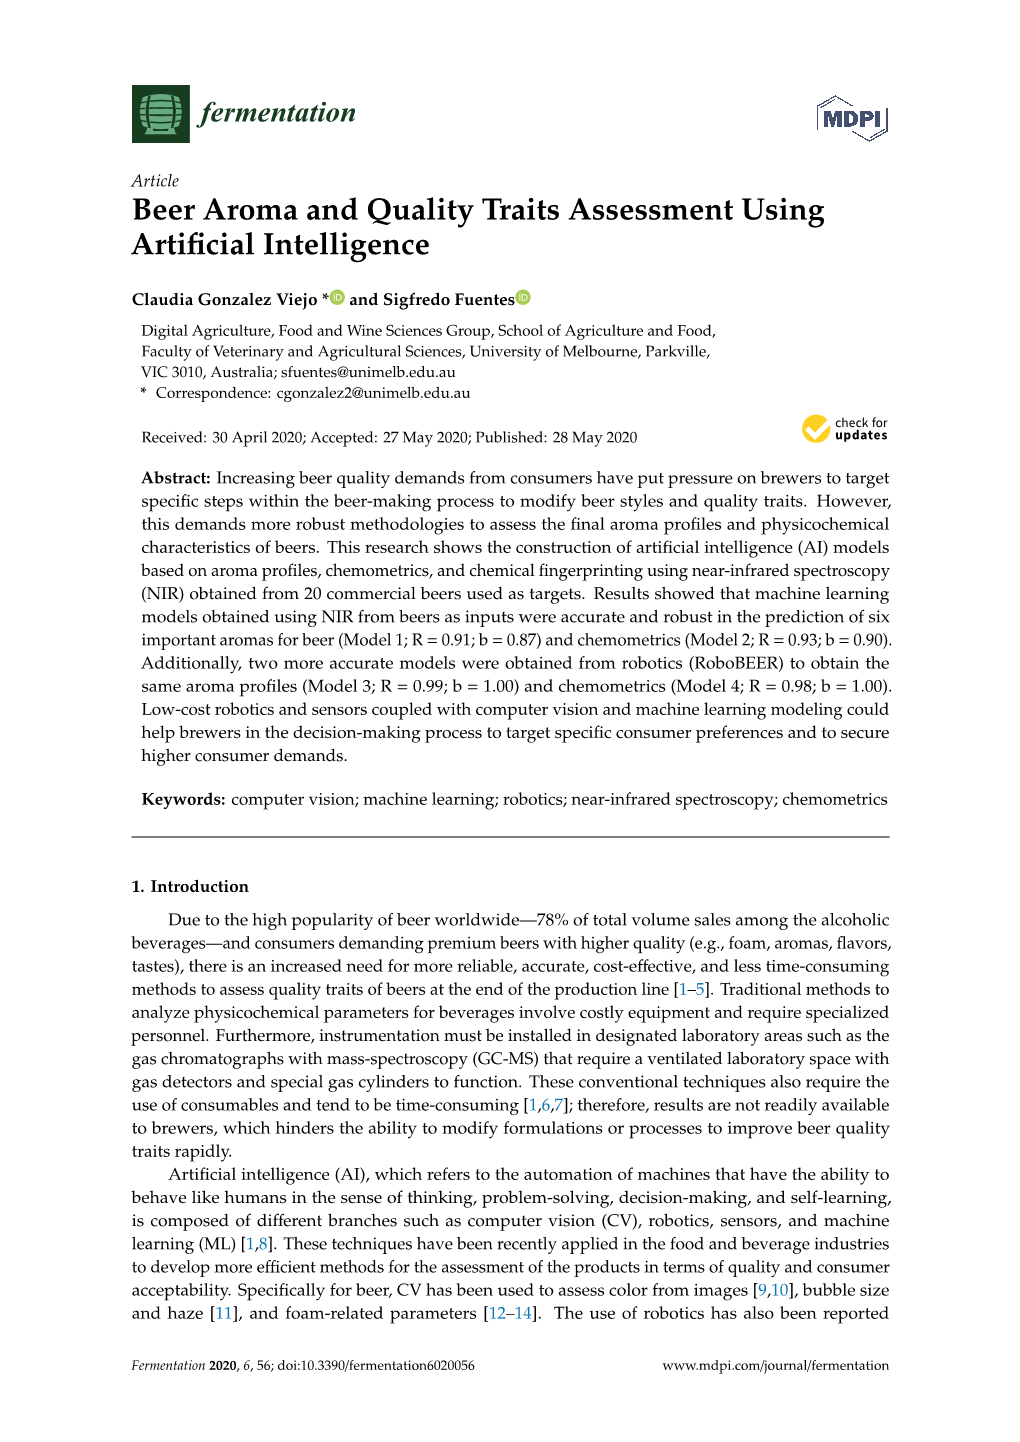 Beer Aroma and Quality Traits Assessment Using Artificial Intelligence